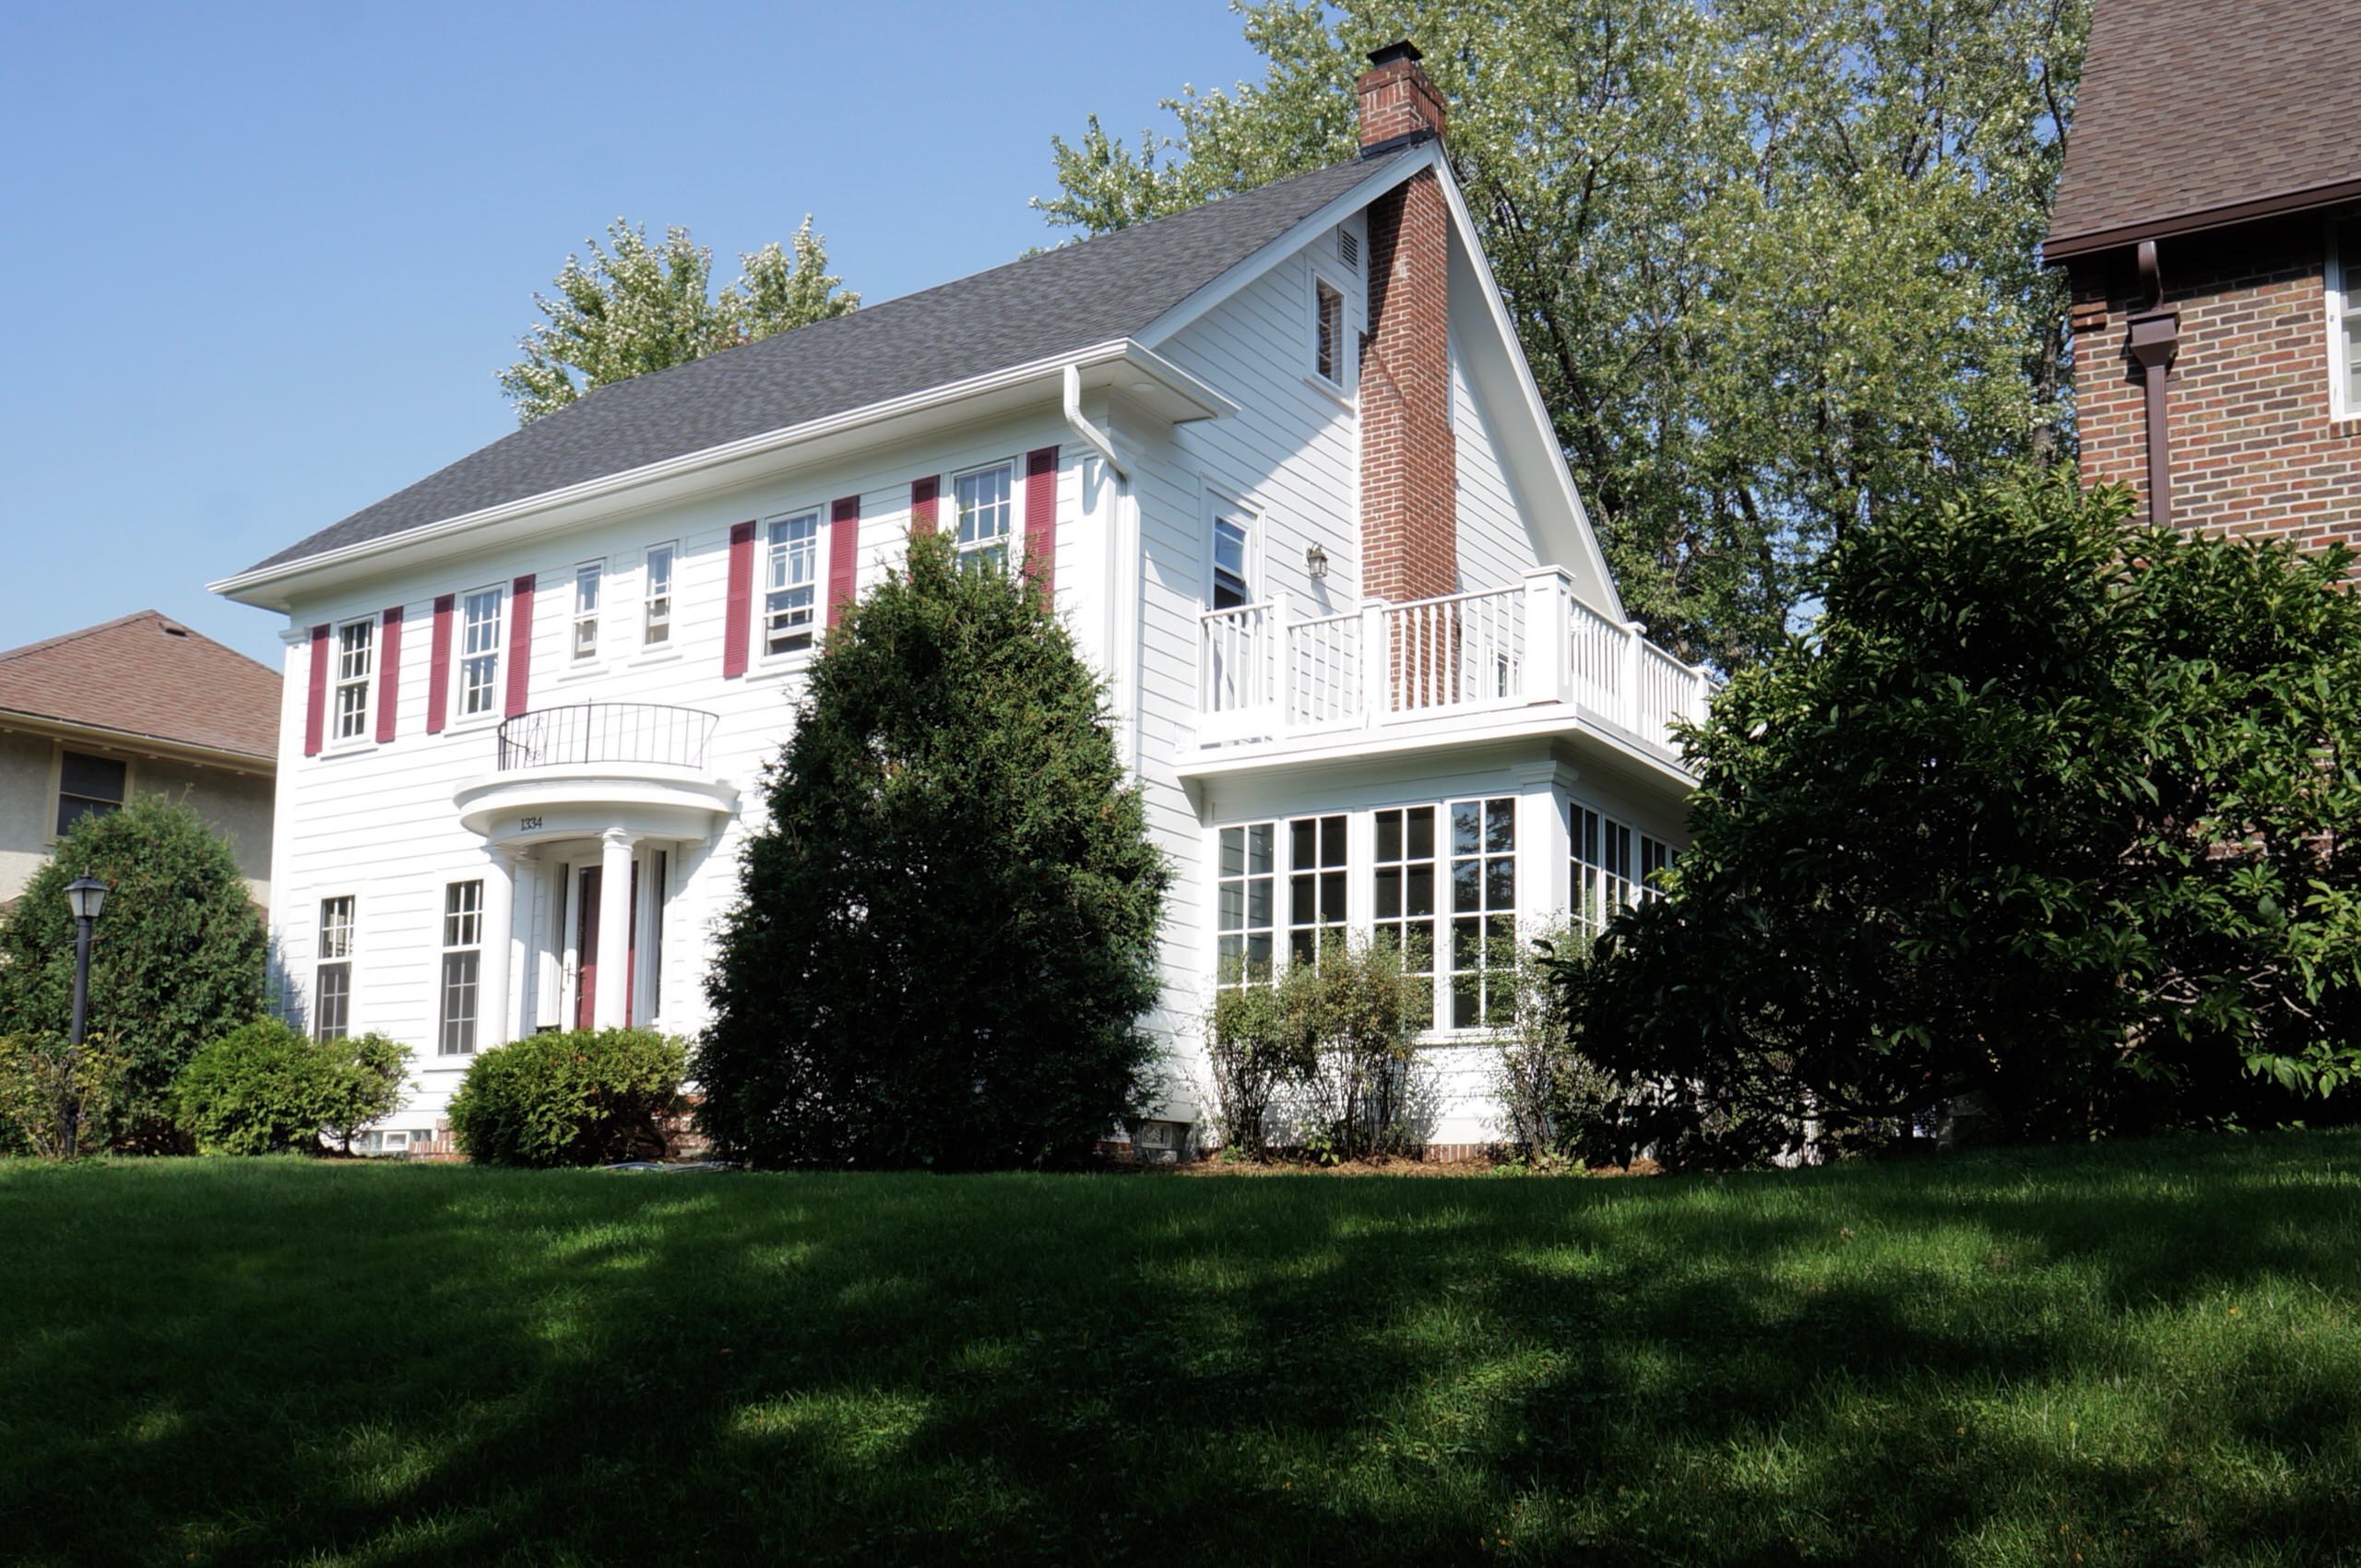 Parkway Colonial Revival